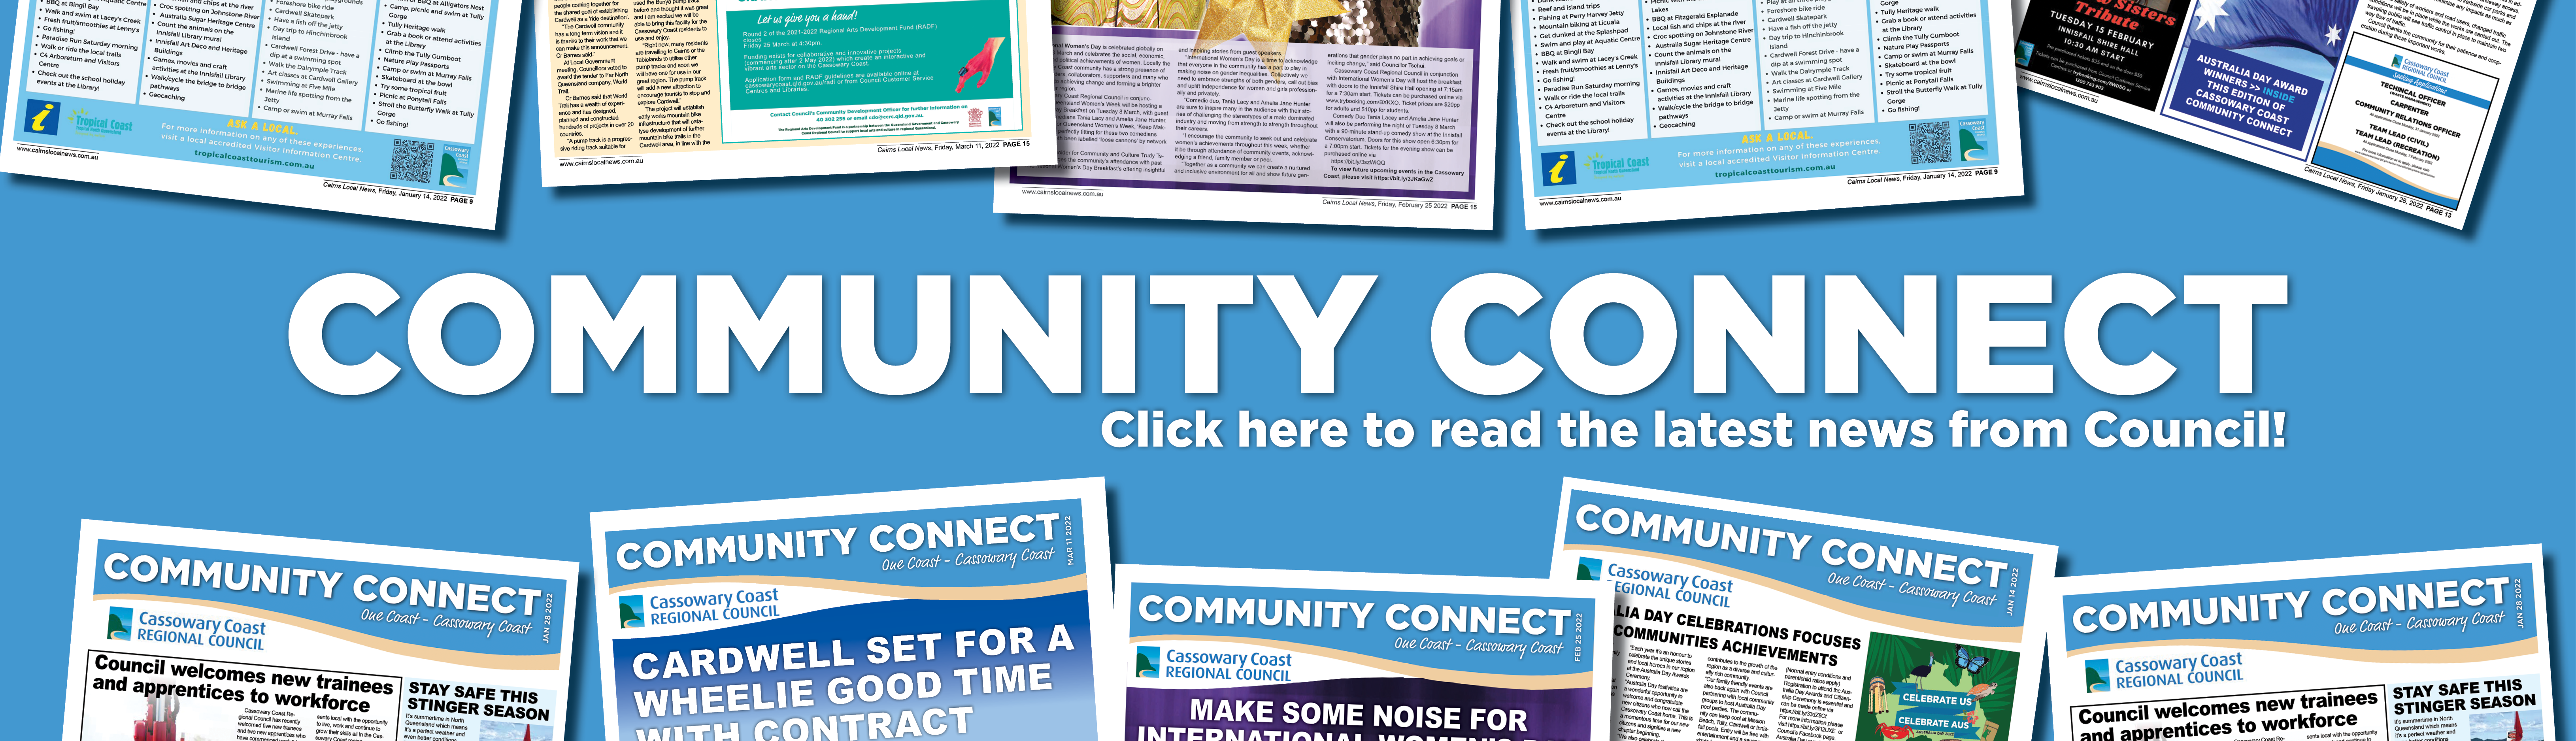 Community Connect Banner